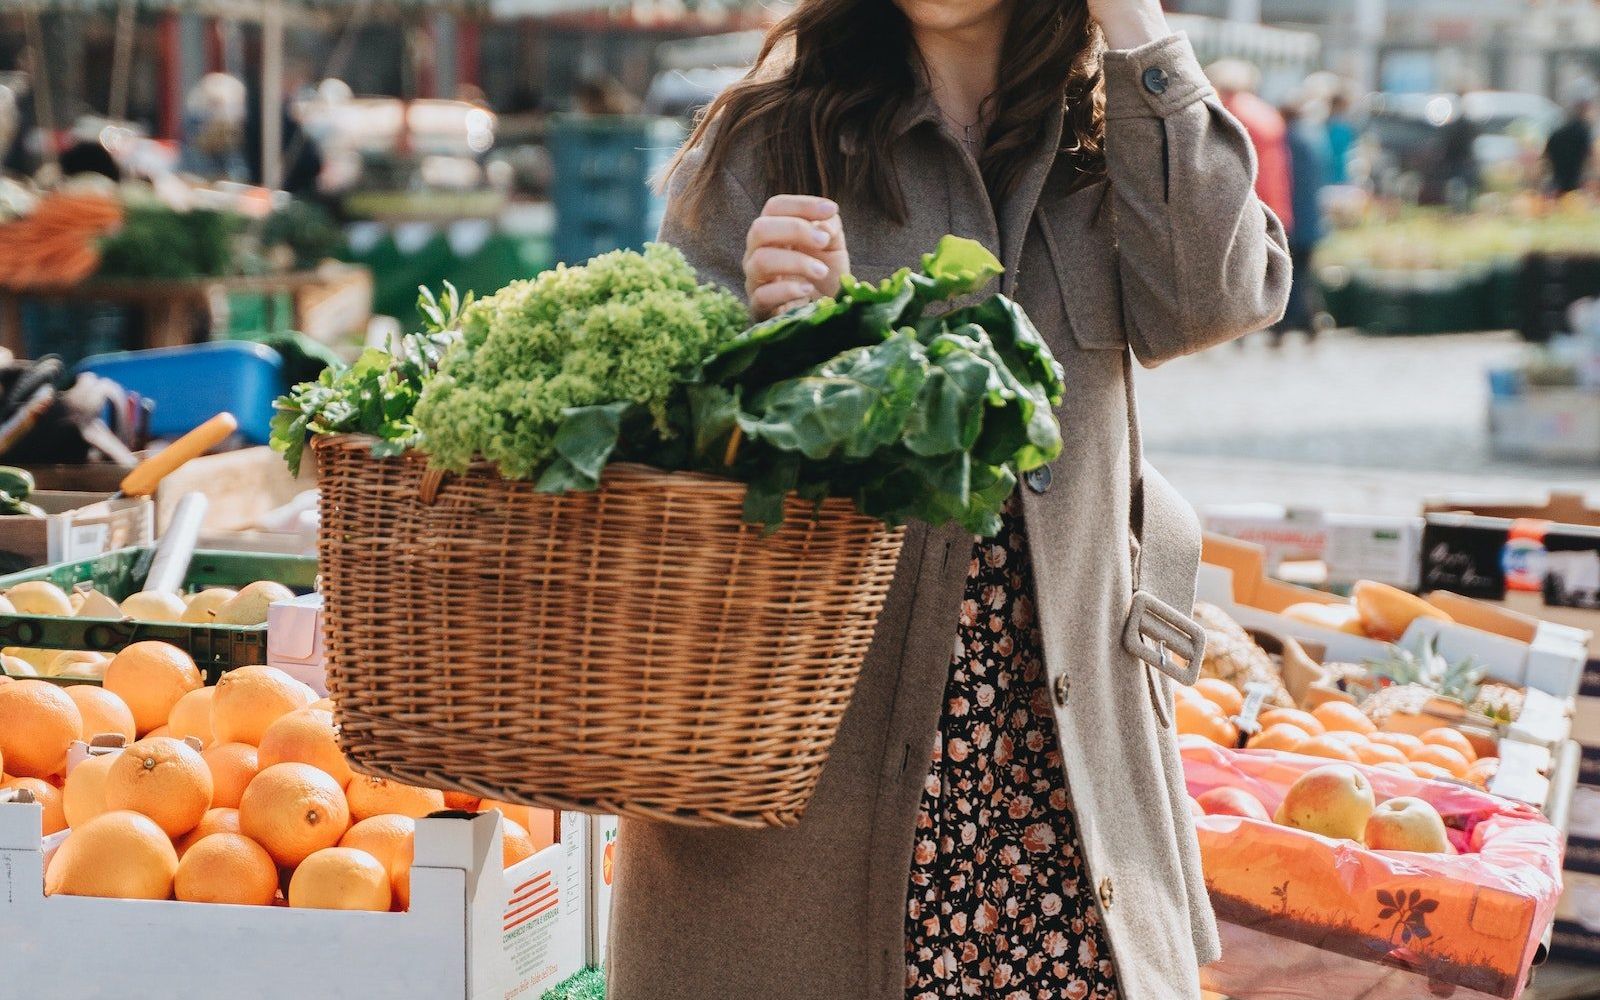 woman at local farmers market carrying a basket full of vegetables